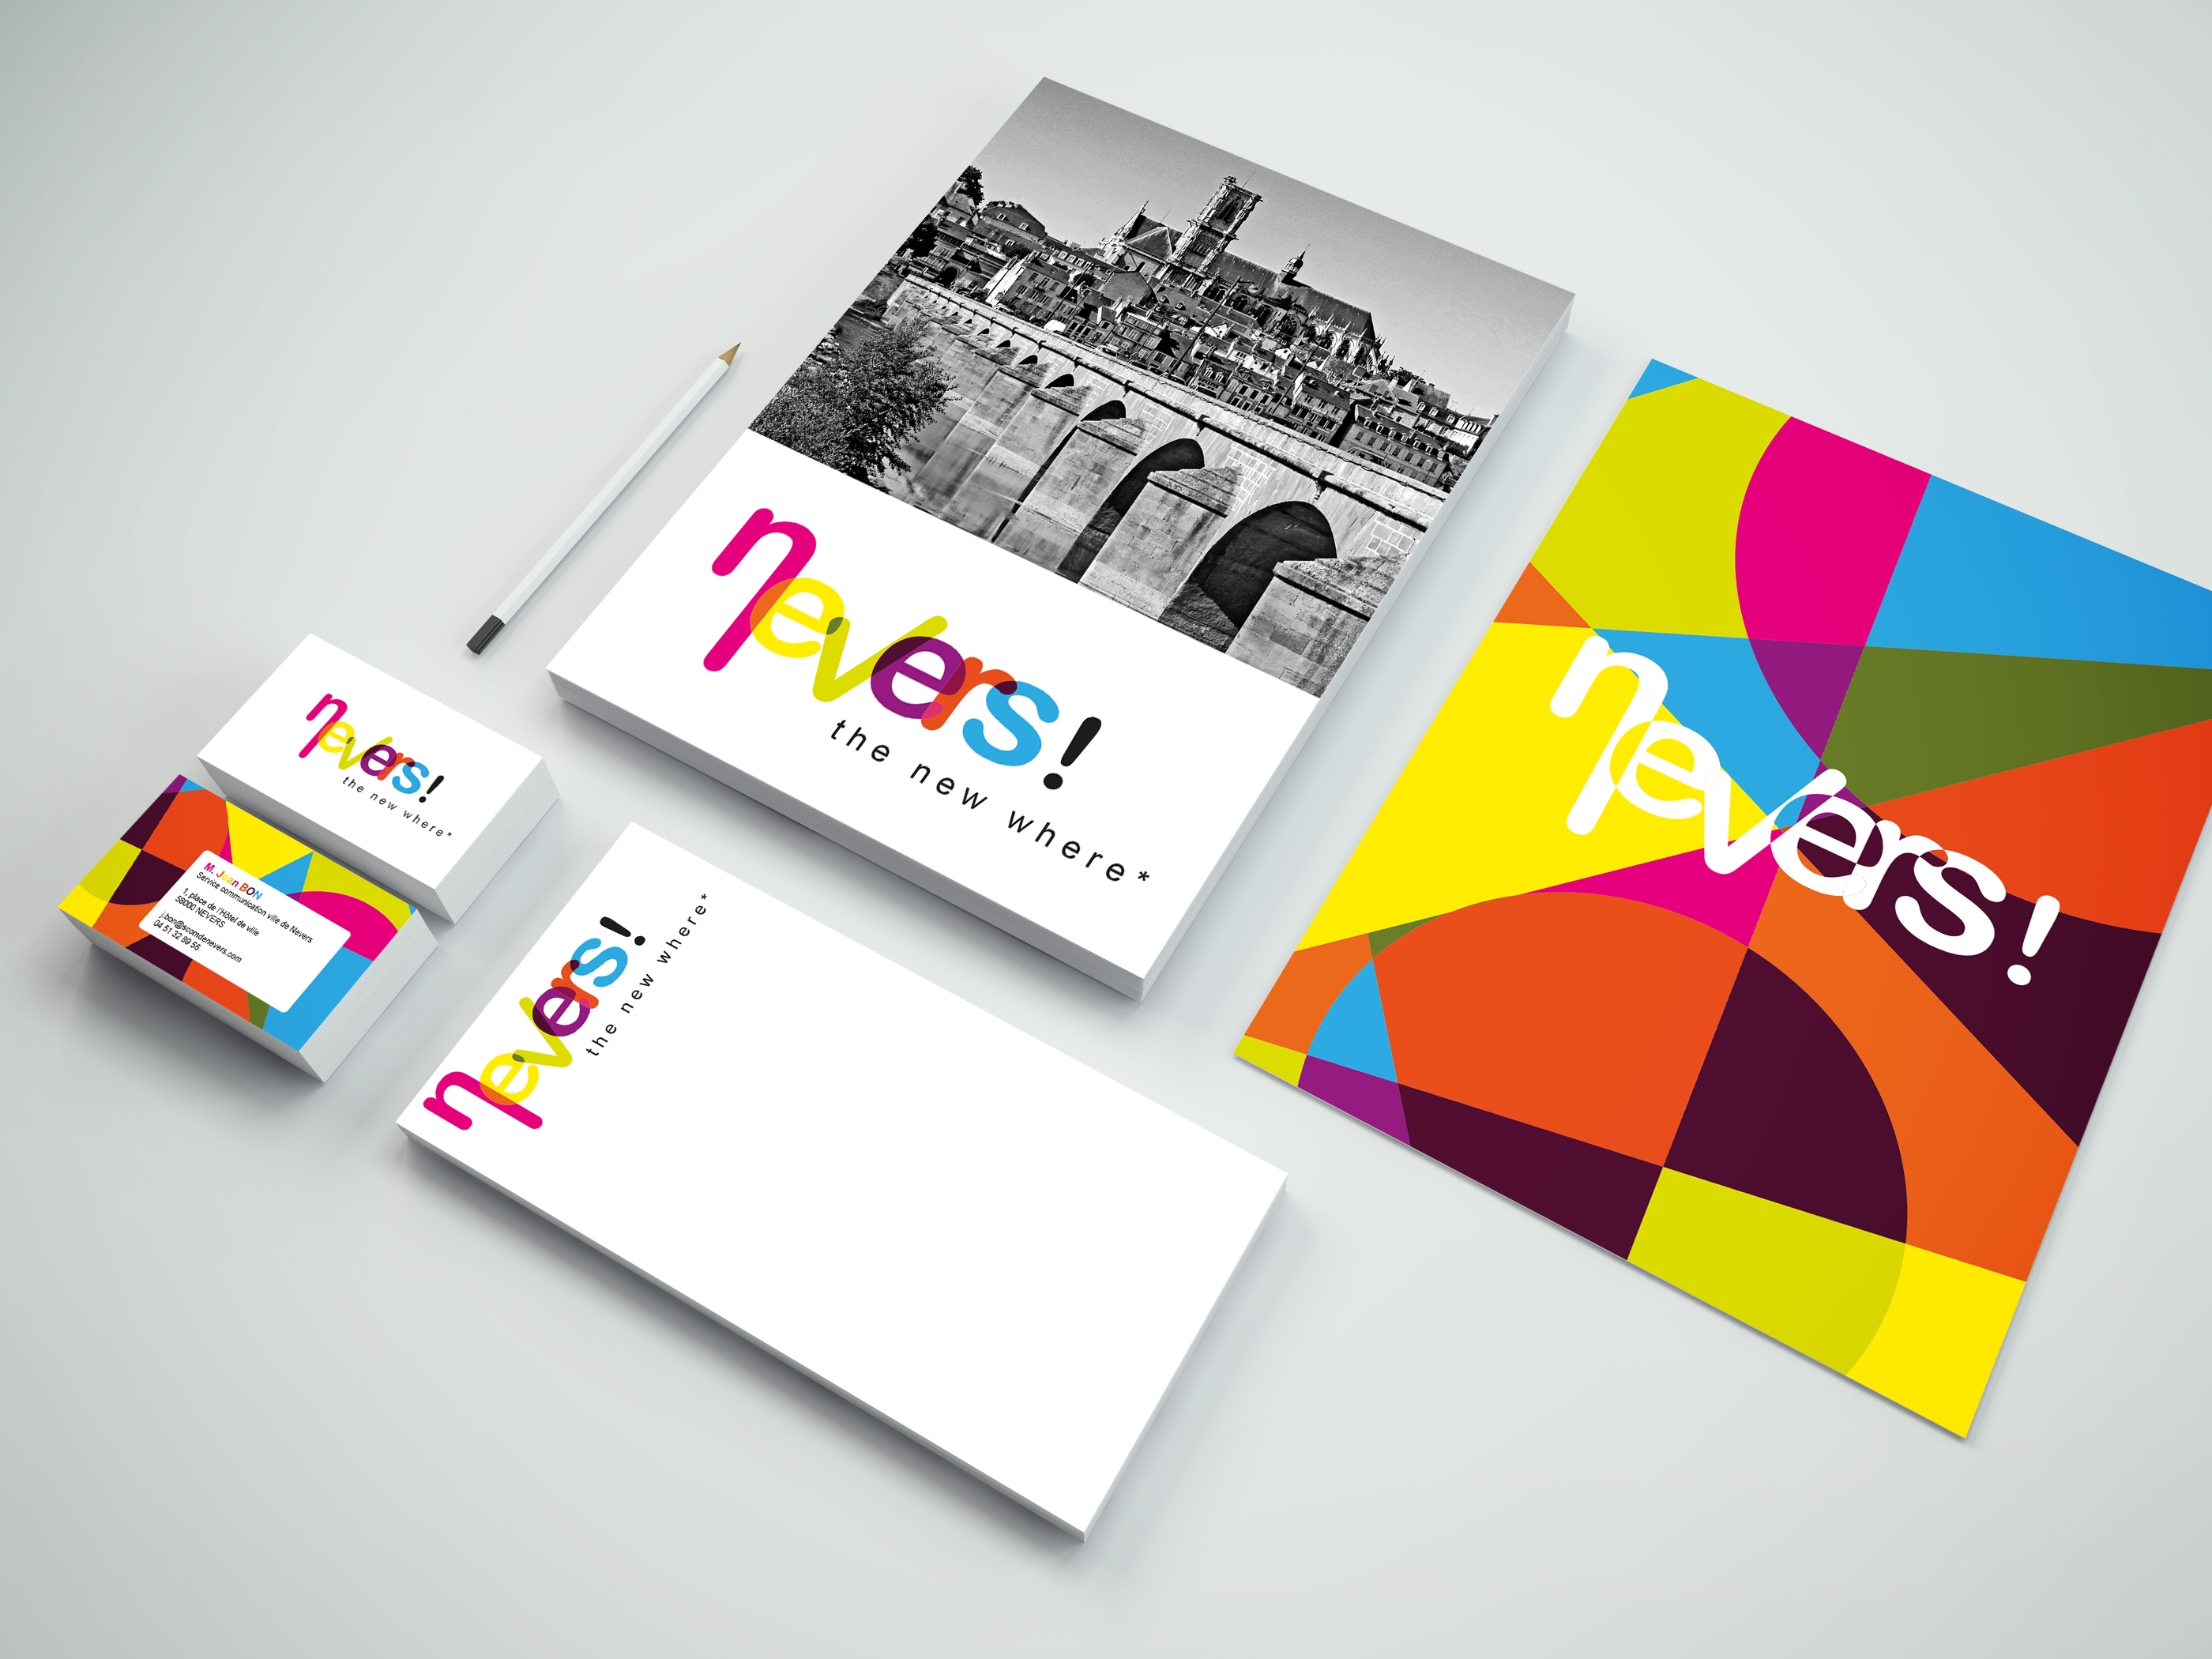 Papeterie_color_refonte_logo_NEVERS